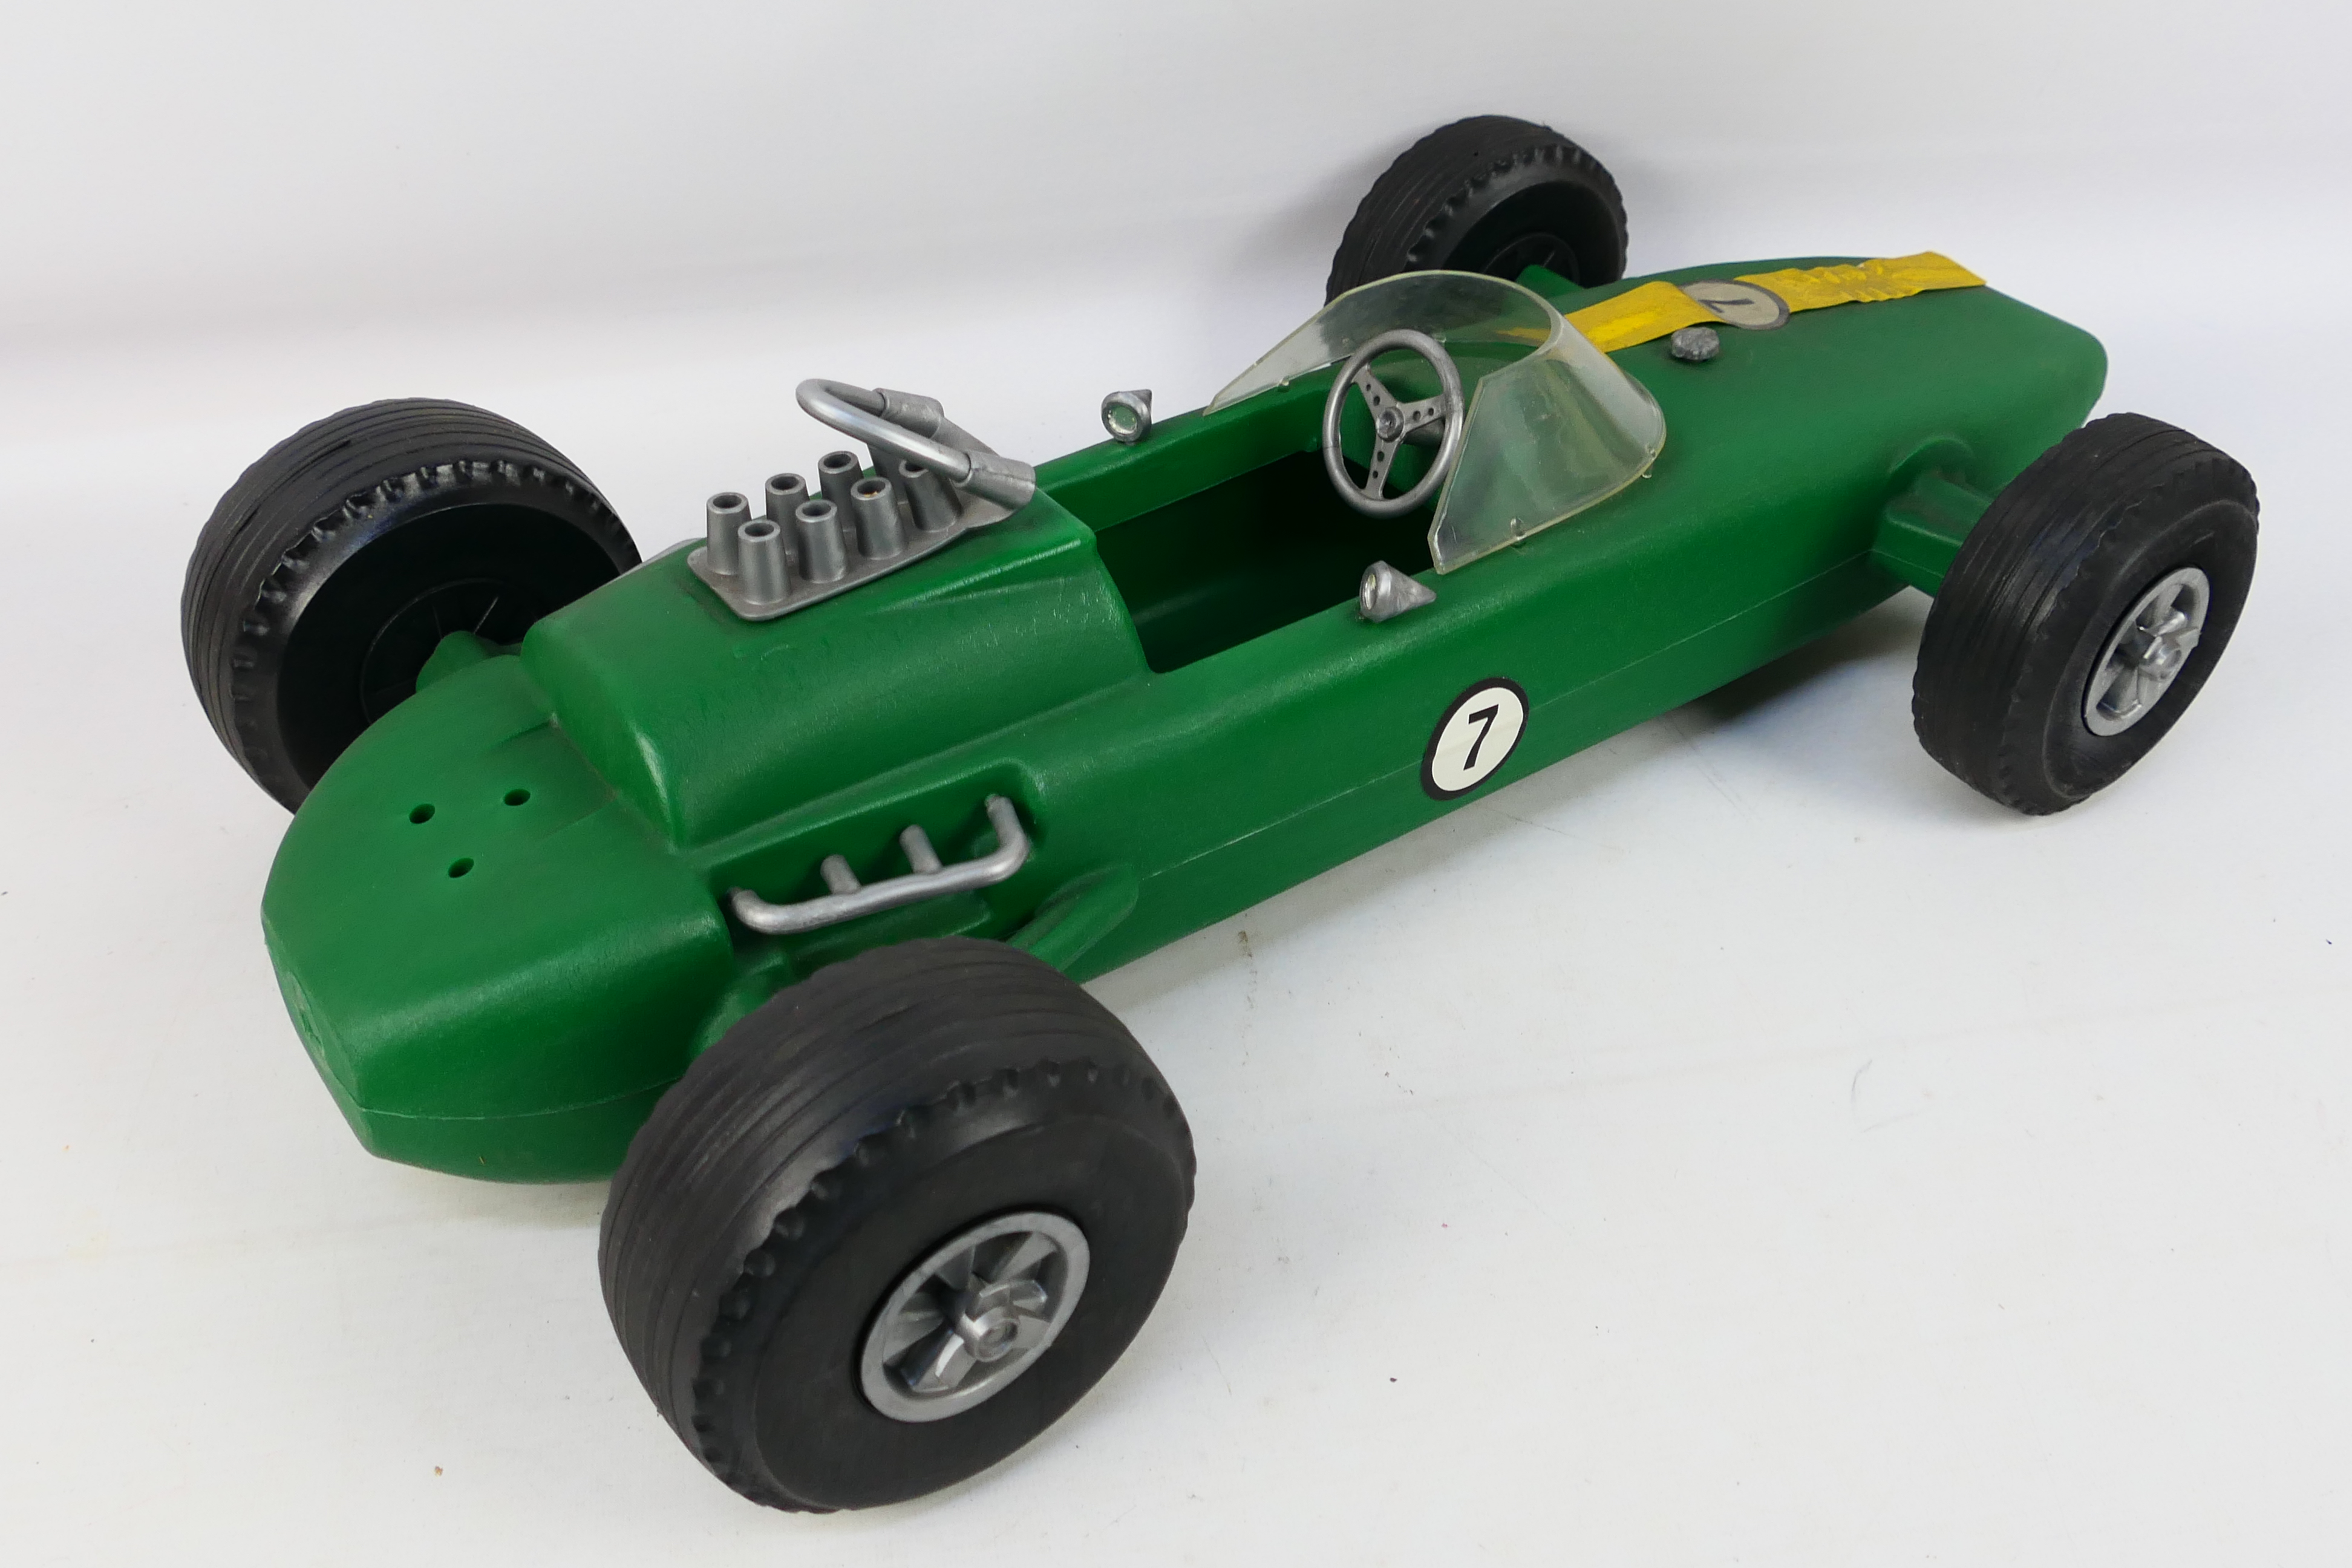 Palitoy - Action Man - An Action Man Grange Prix Racing Car (#34810) 60cm long This item is the car - Image 5 of 9